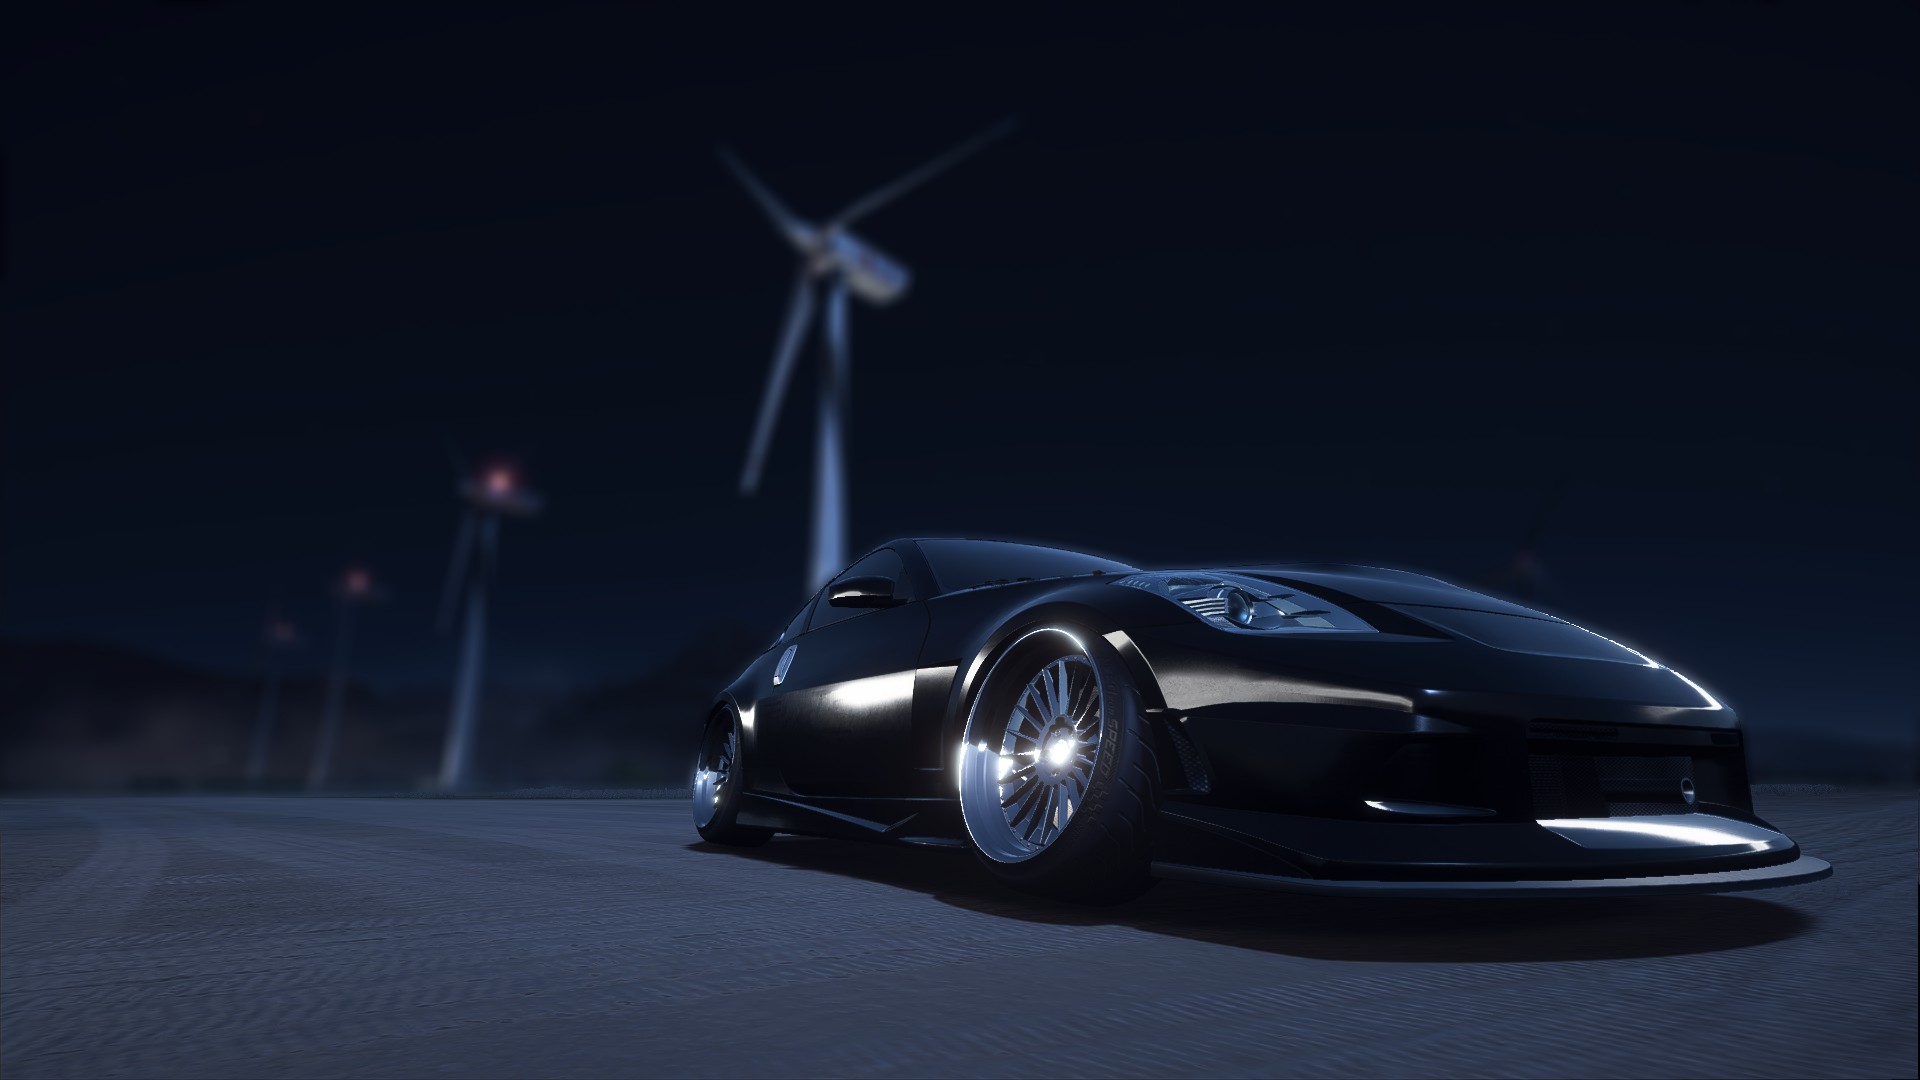 Car Night Moonlight Wheels Need For Speed Need For Speed Payback Nissan Nissan 350Z 1920x1080